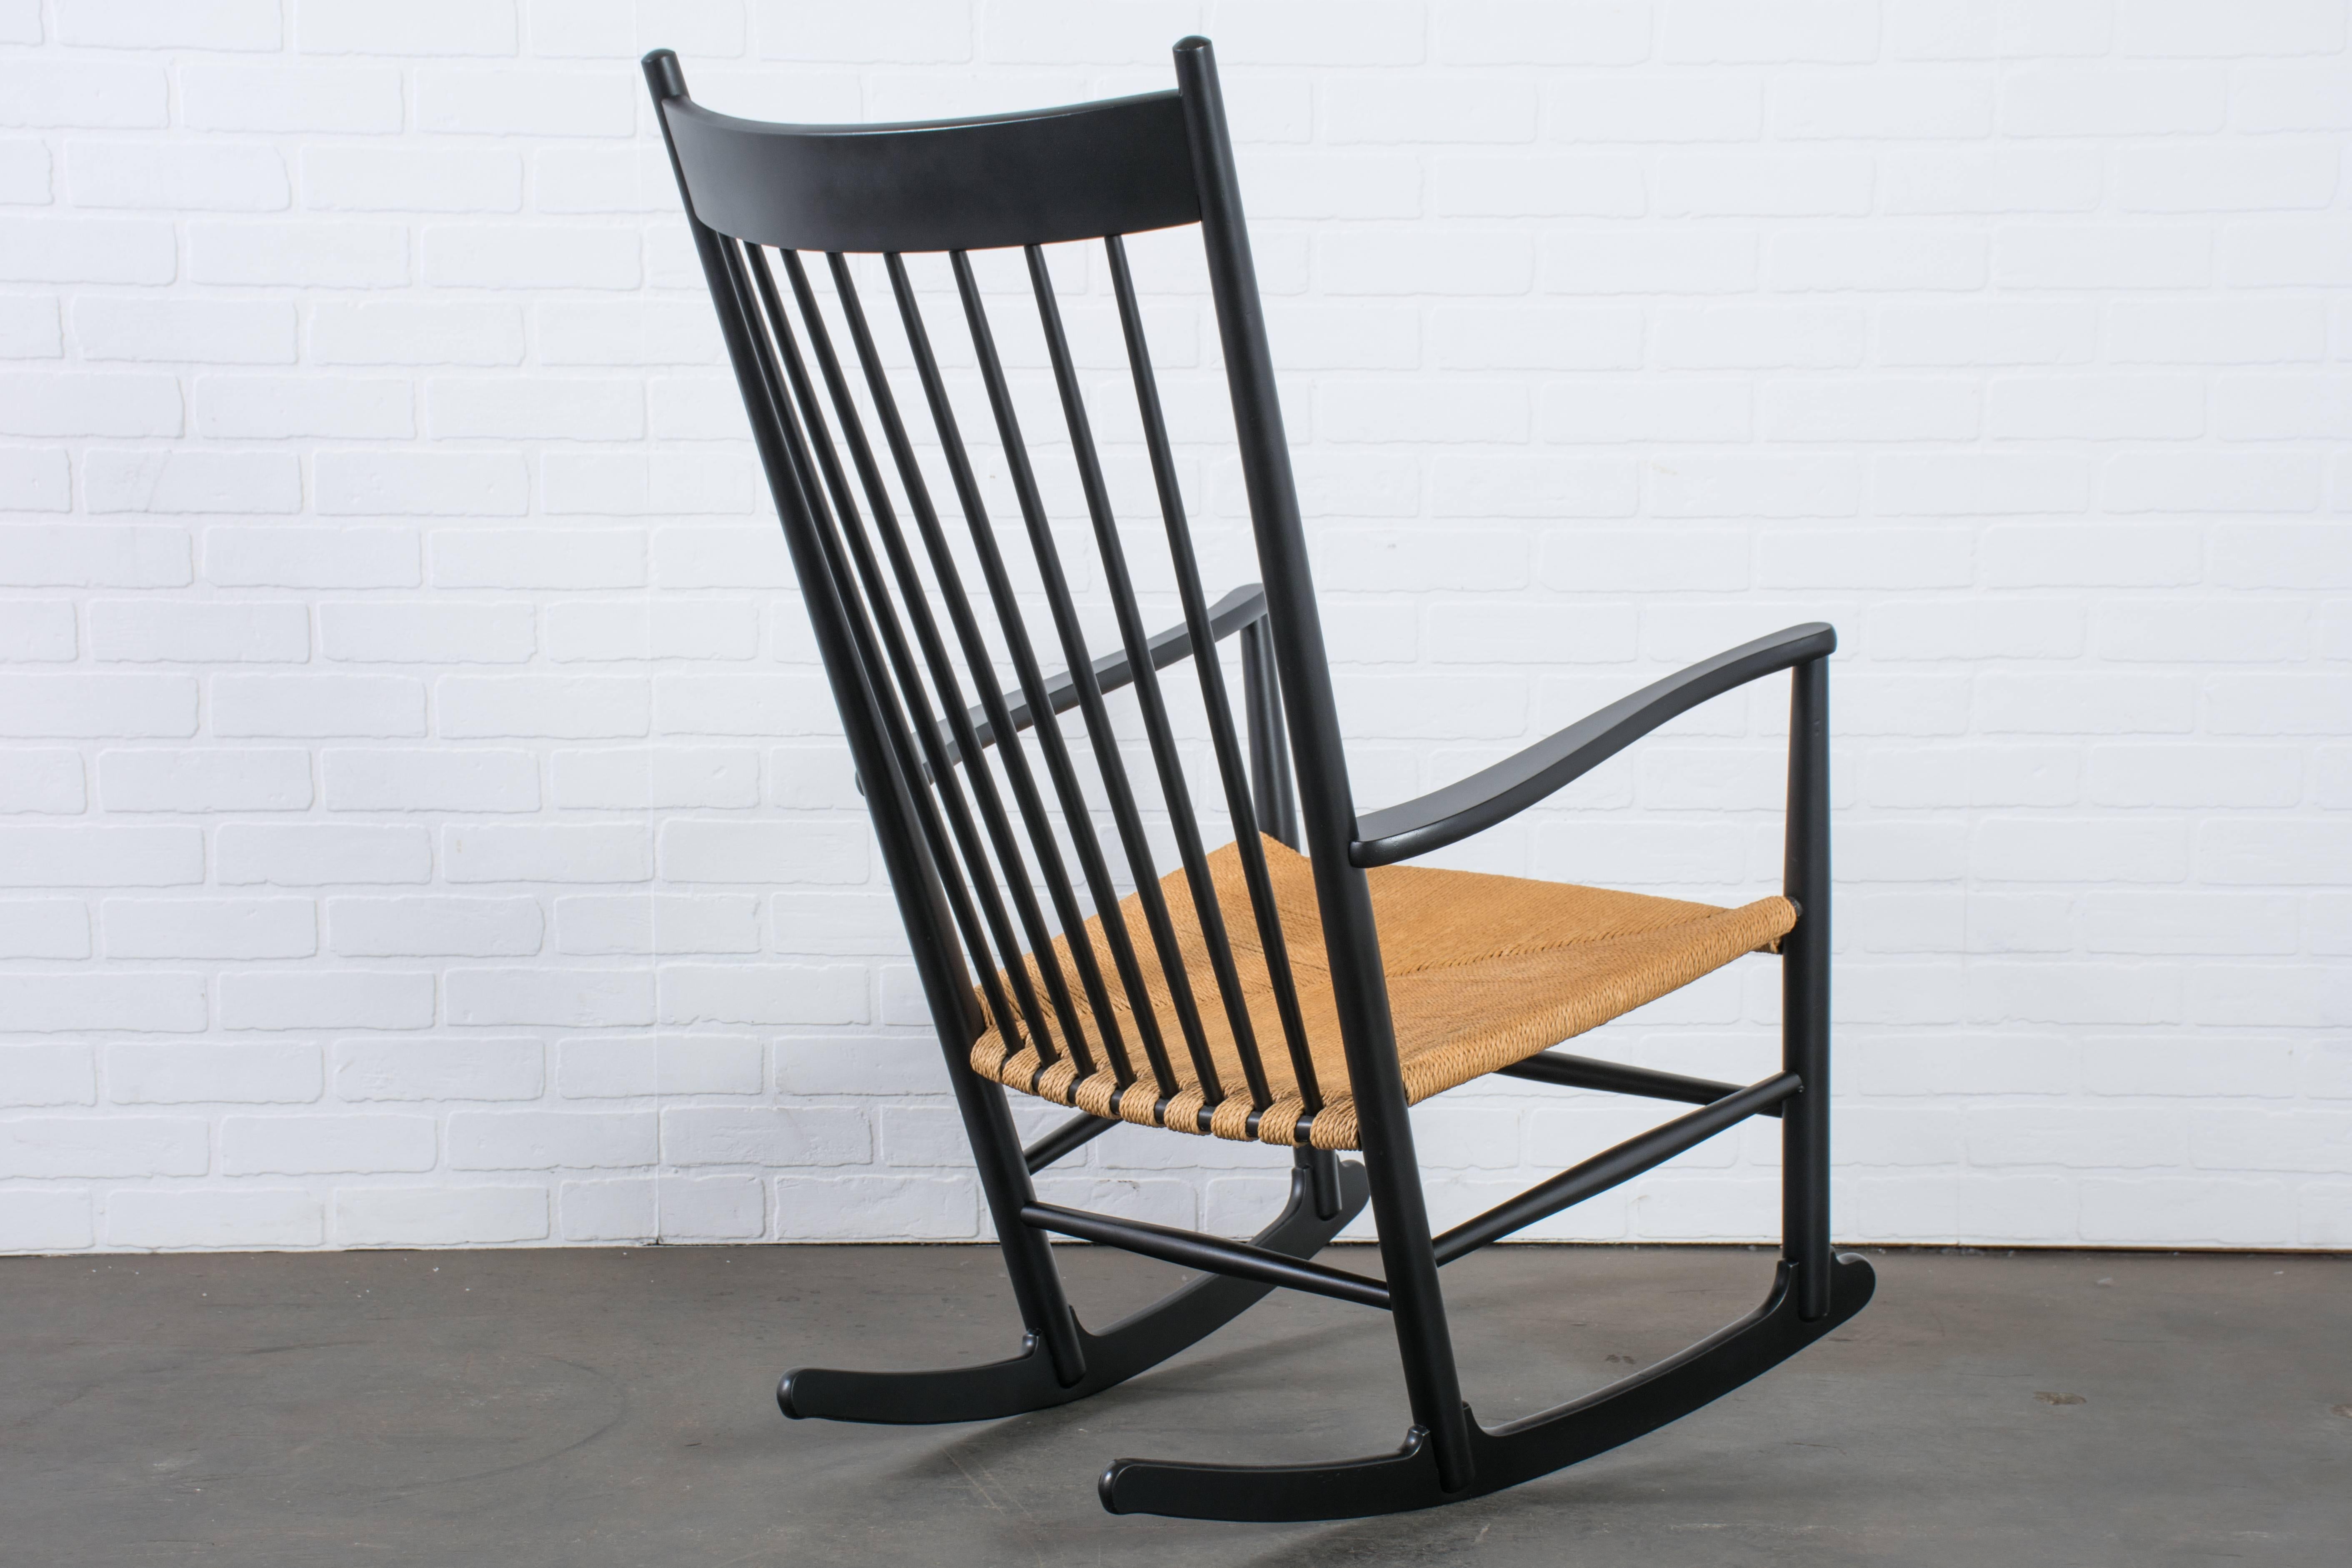 This Classic Danish Modern rocker was designed by Hans Wegner in the 1940s. It was first manufactured by FDB Mobler in 1944 and because of it's popularity, has been in production ever since. This vintage high back rocking chair has a beech frame